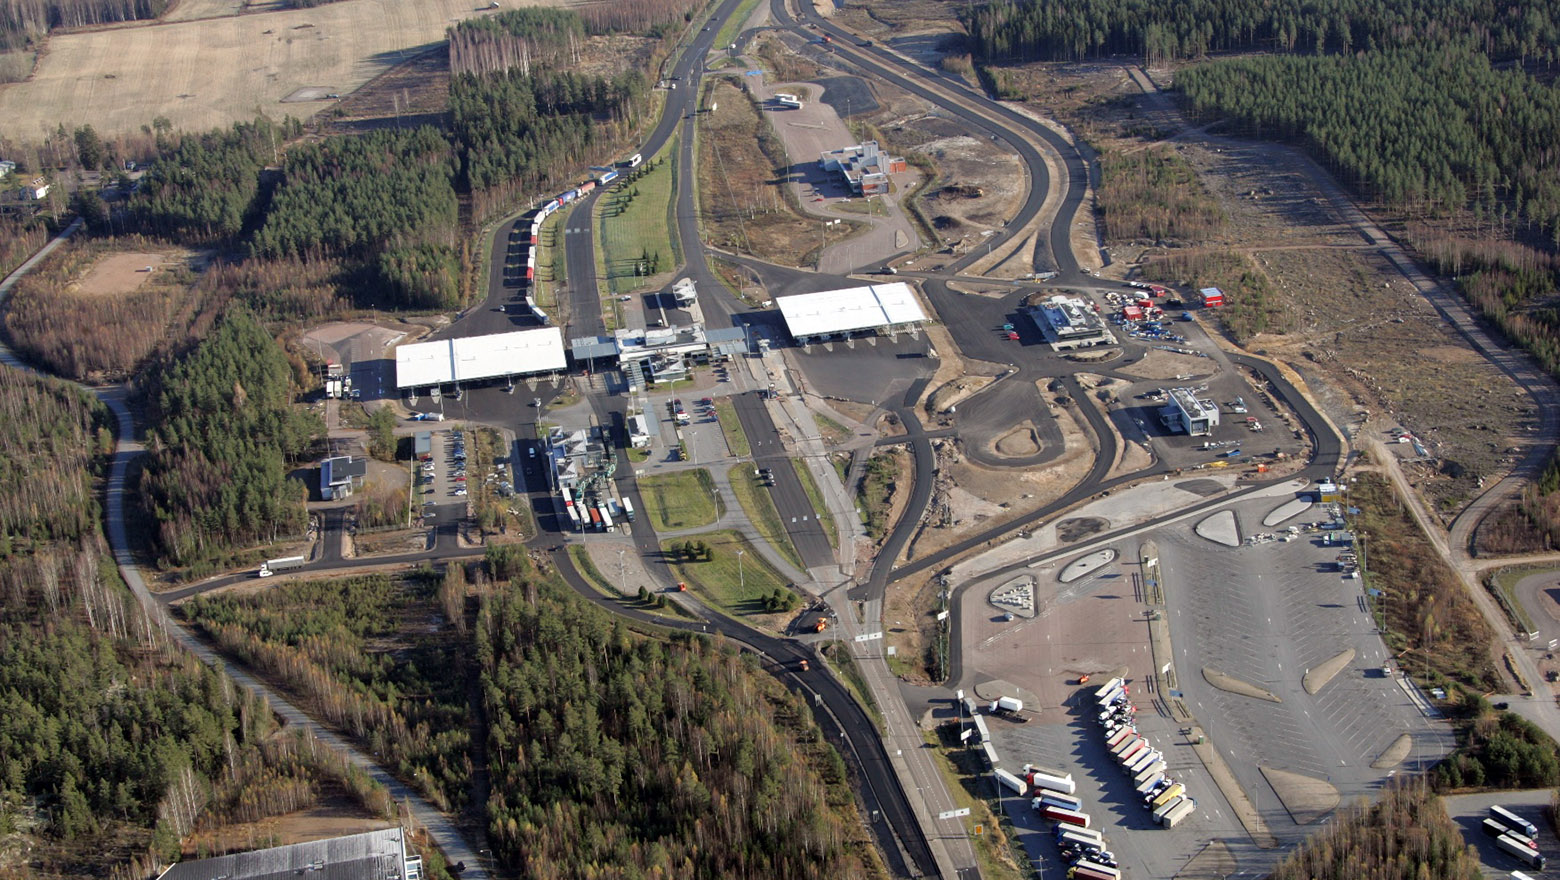 Aerial photo of Vaalimaa border crossing point in 2015